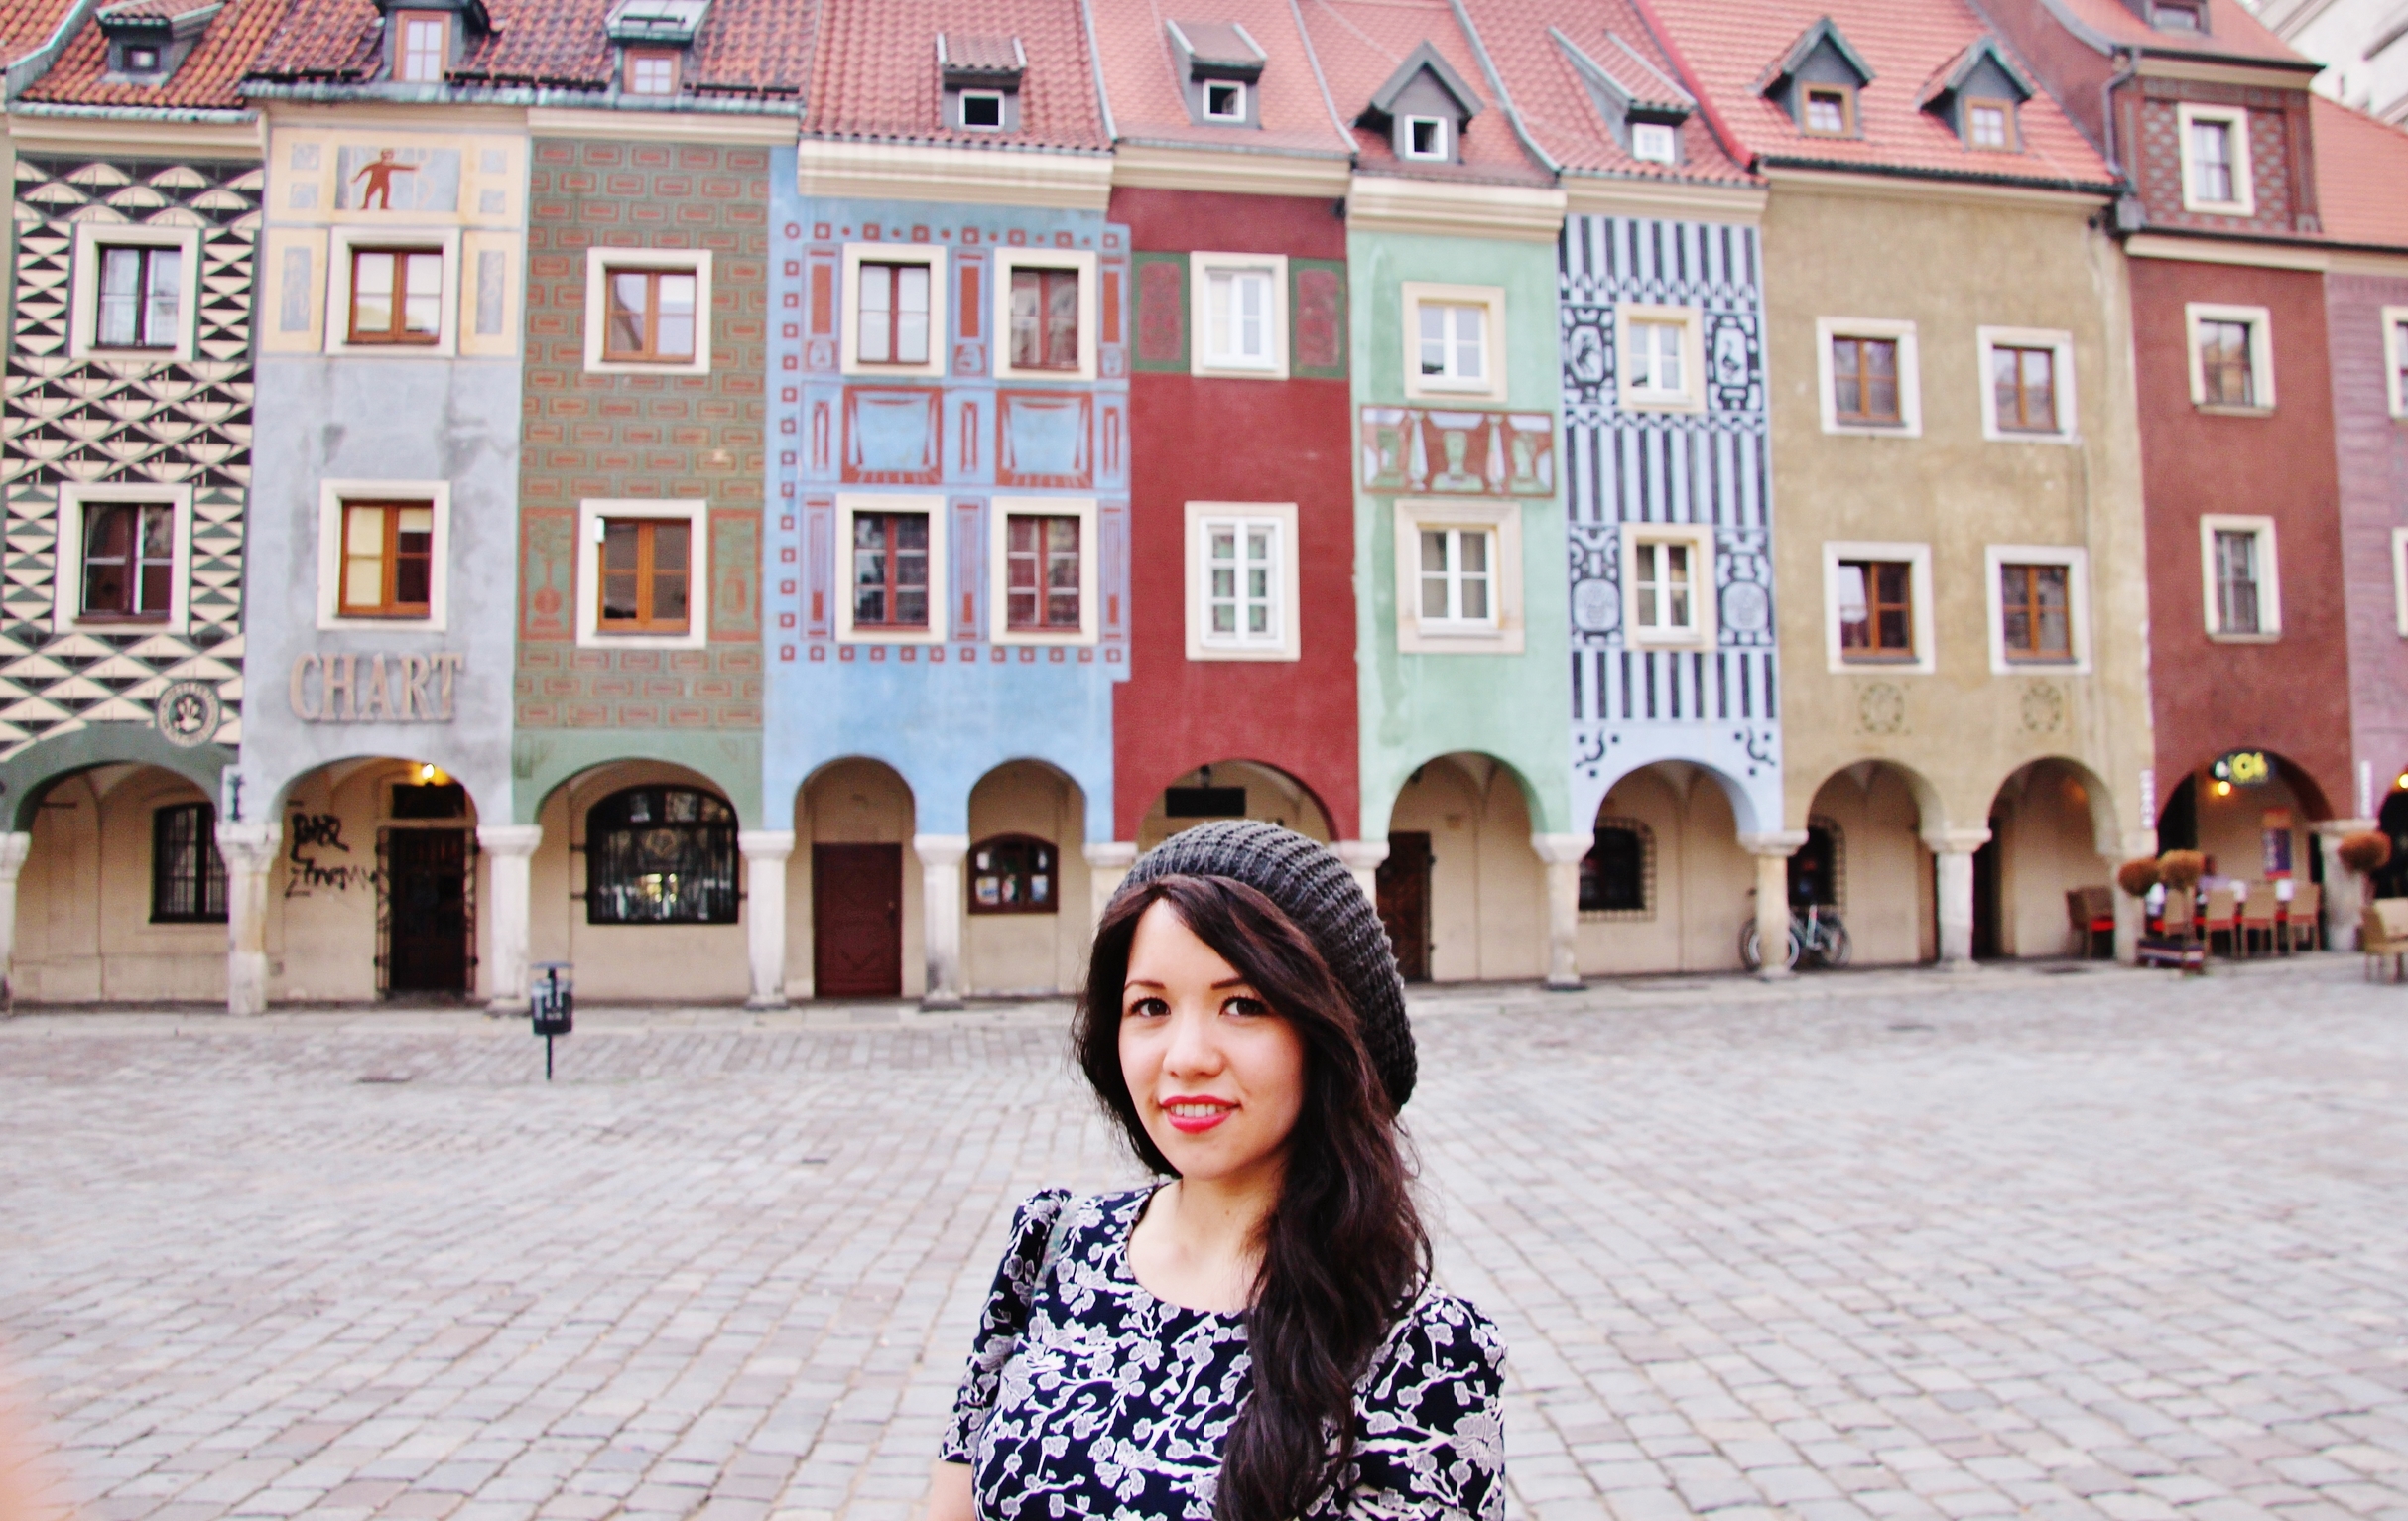 The colourful Merchant houses in Poznan's old market square